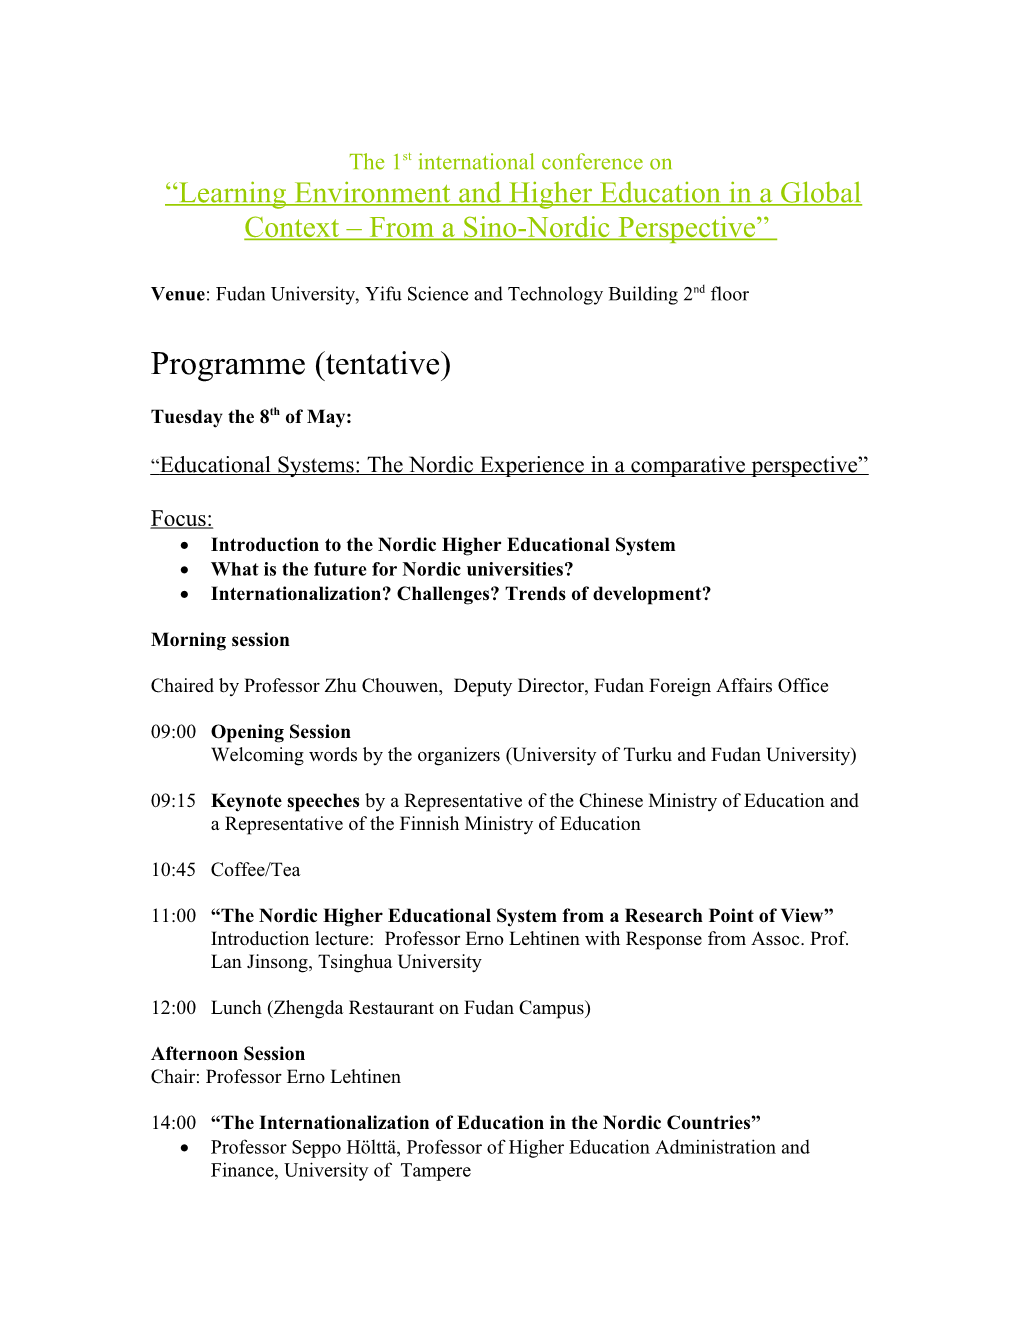 Title of the Conference: Learning Environments and Educational Systems: a Scandinavian